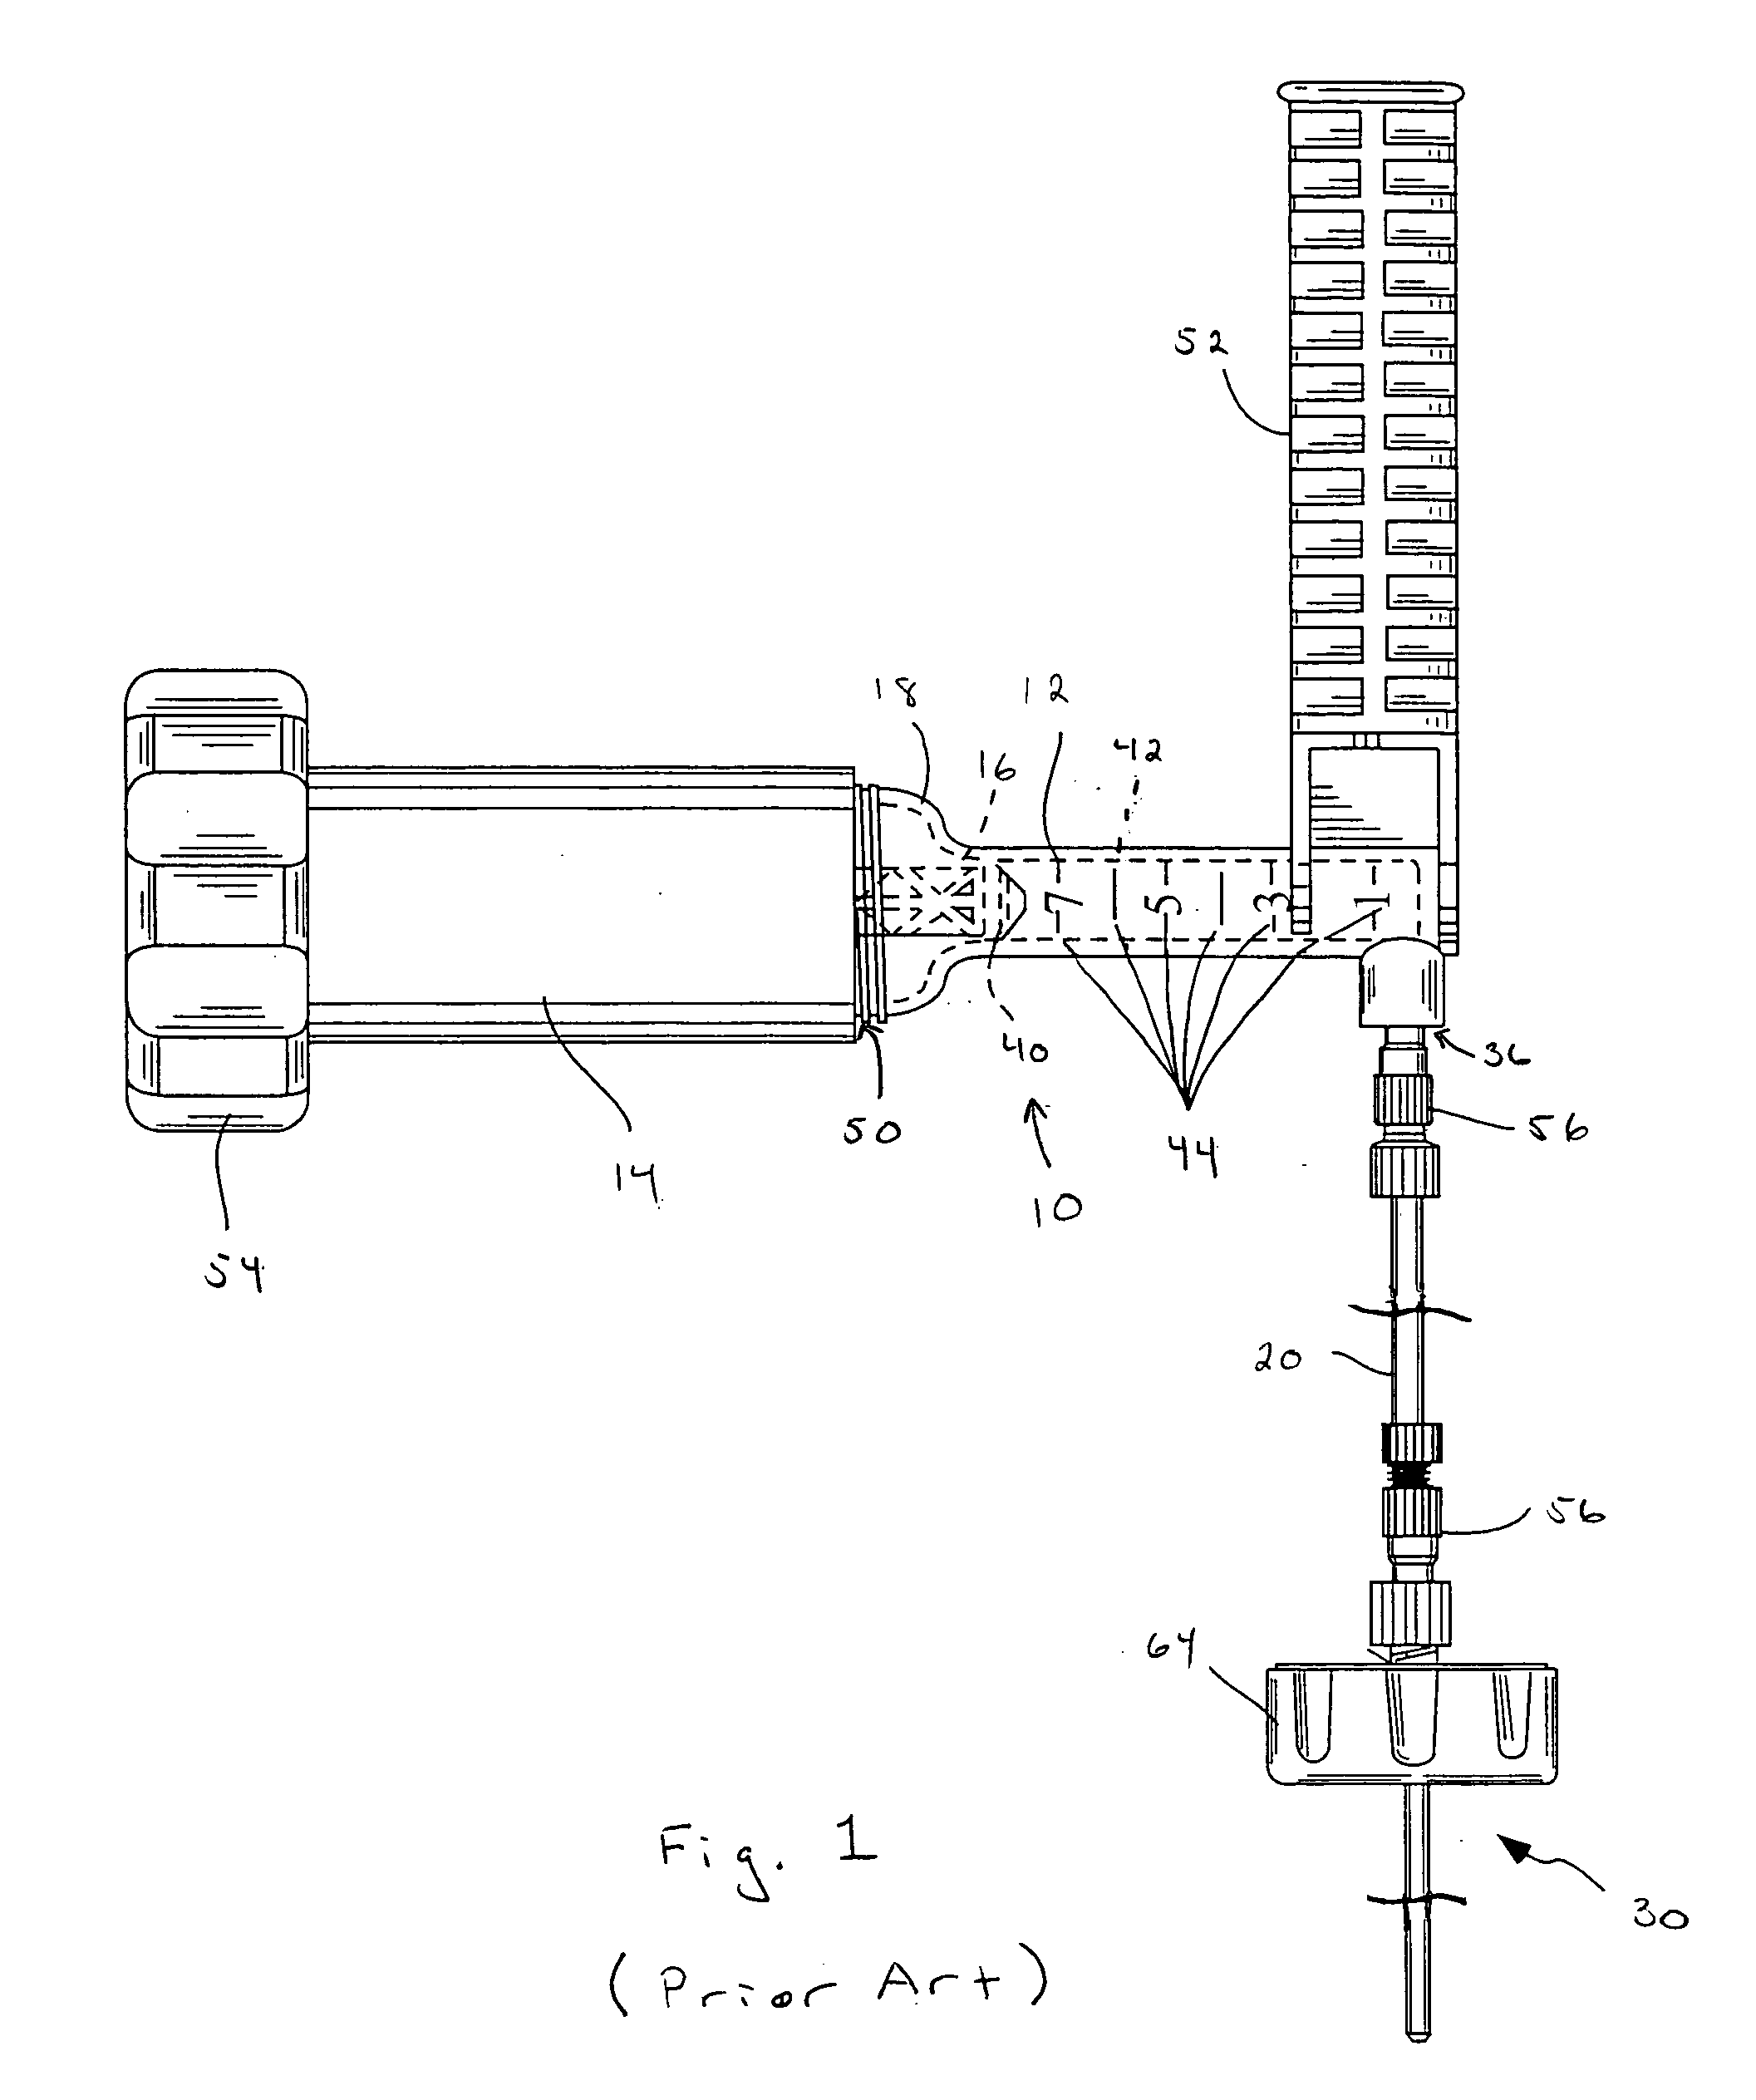 Remotely actuated system for bone cement delivery